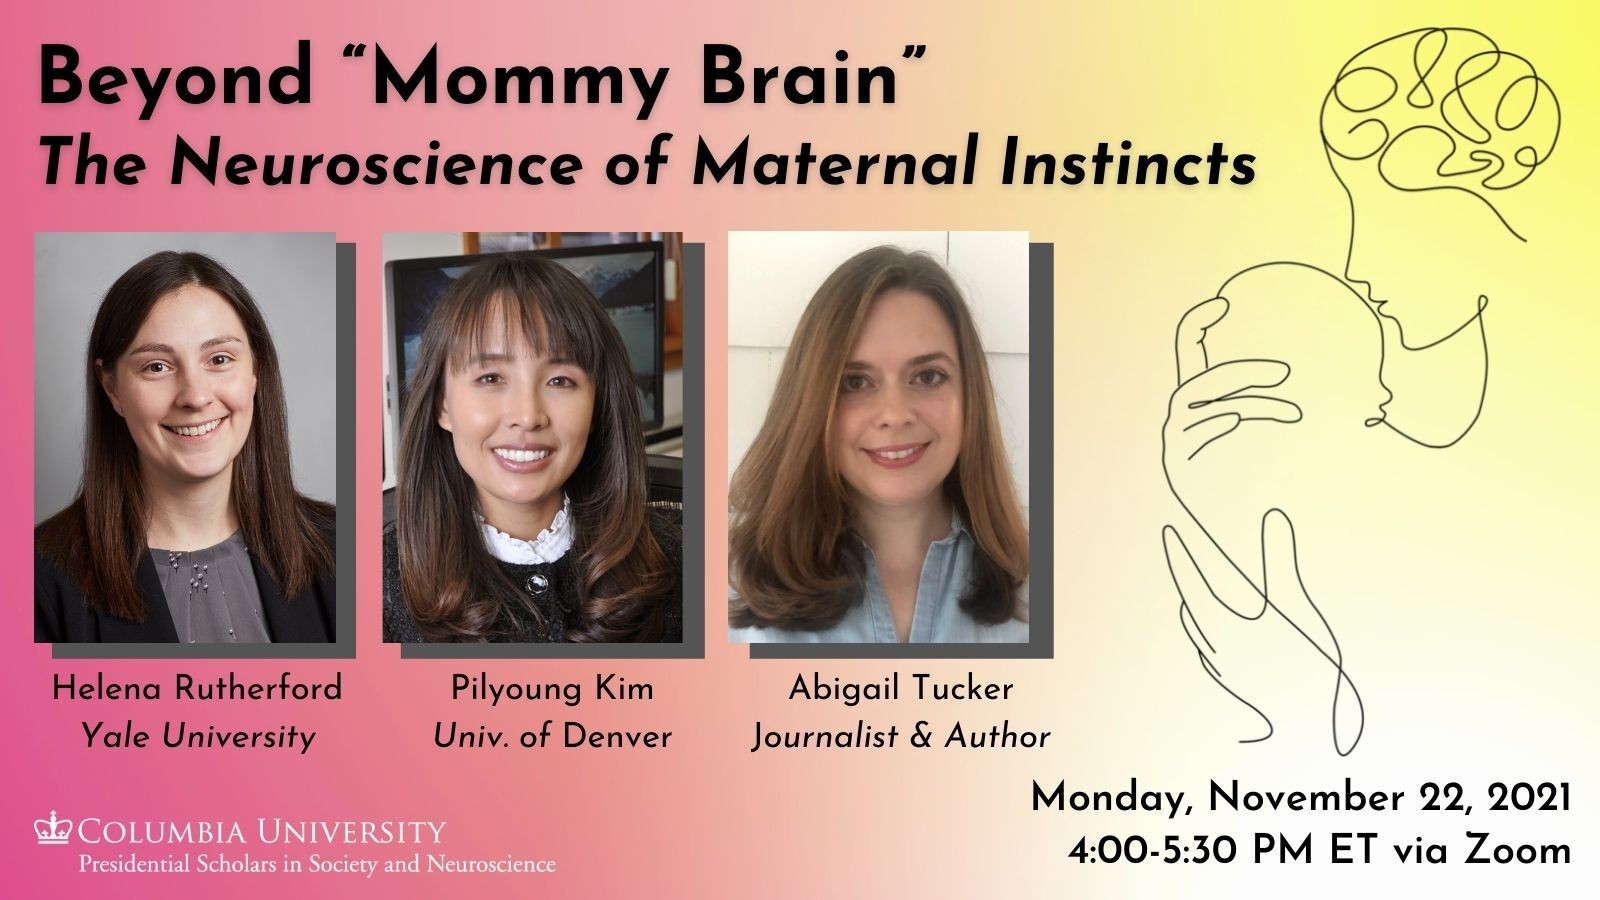 beyond mommy brain poster with images of speakers and graphic of woman holding a baby